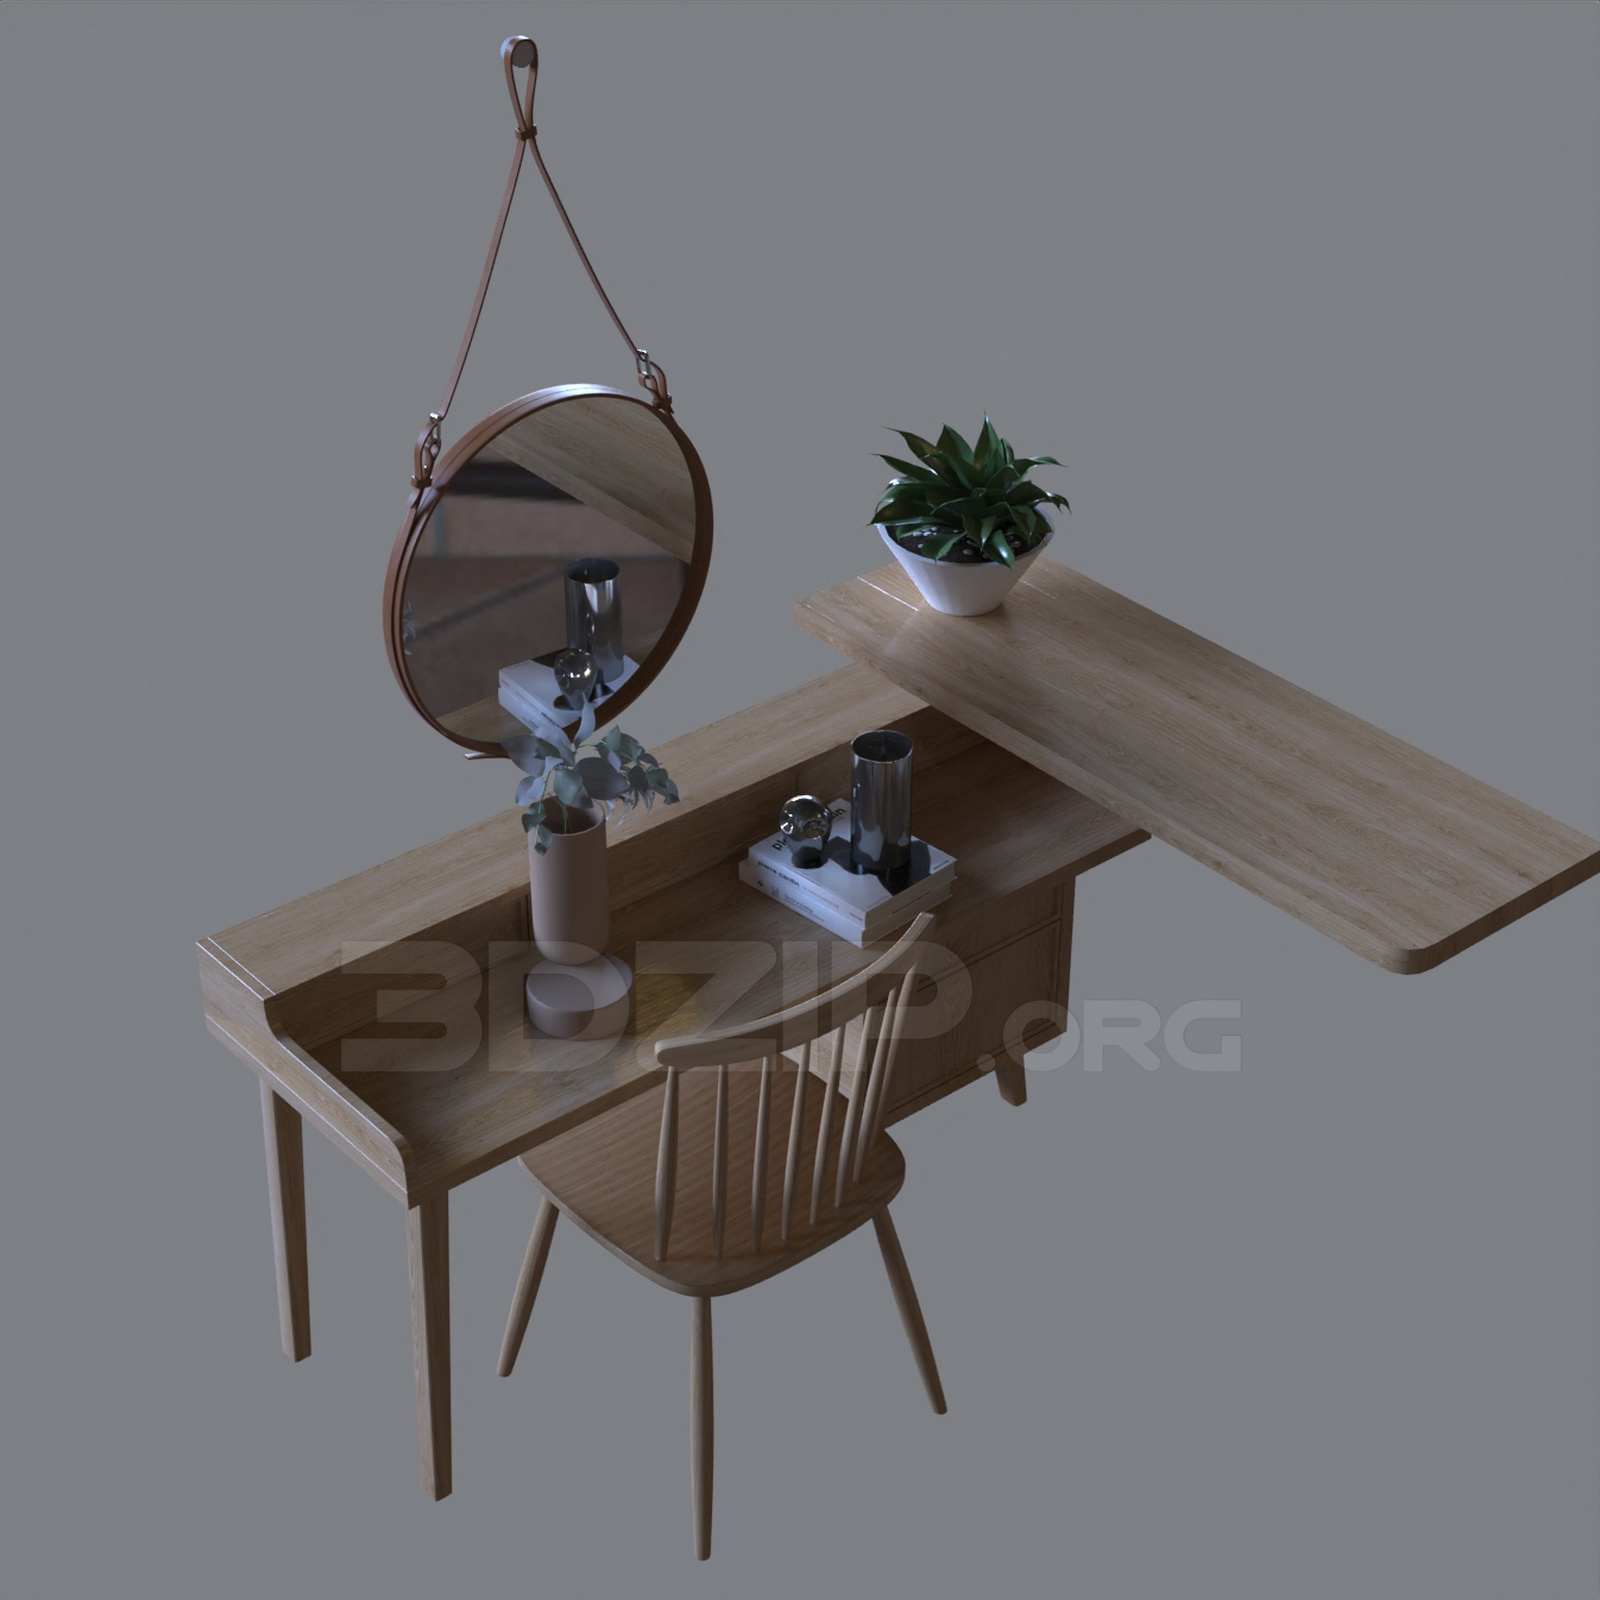 12218. Download Free Dressing Table Model By Phuong Tran